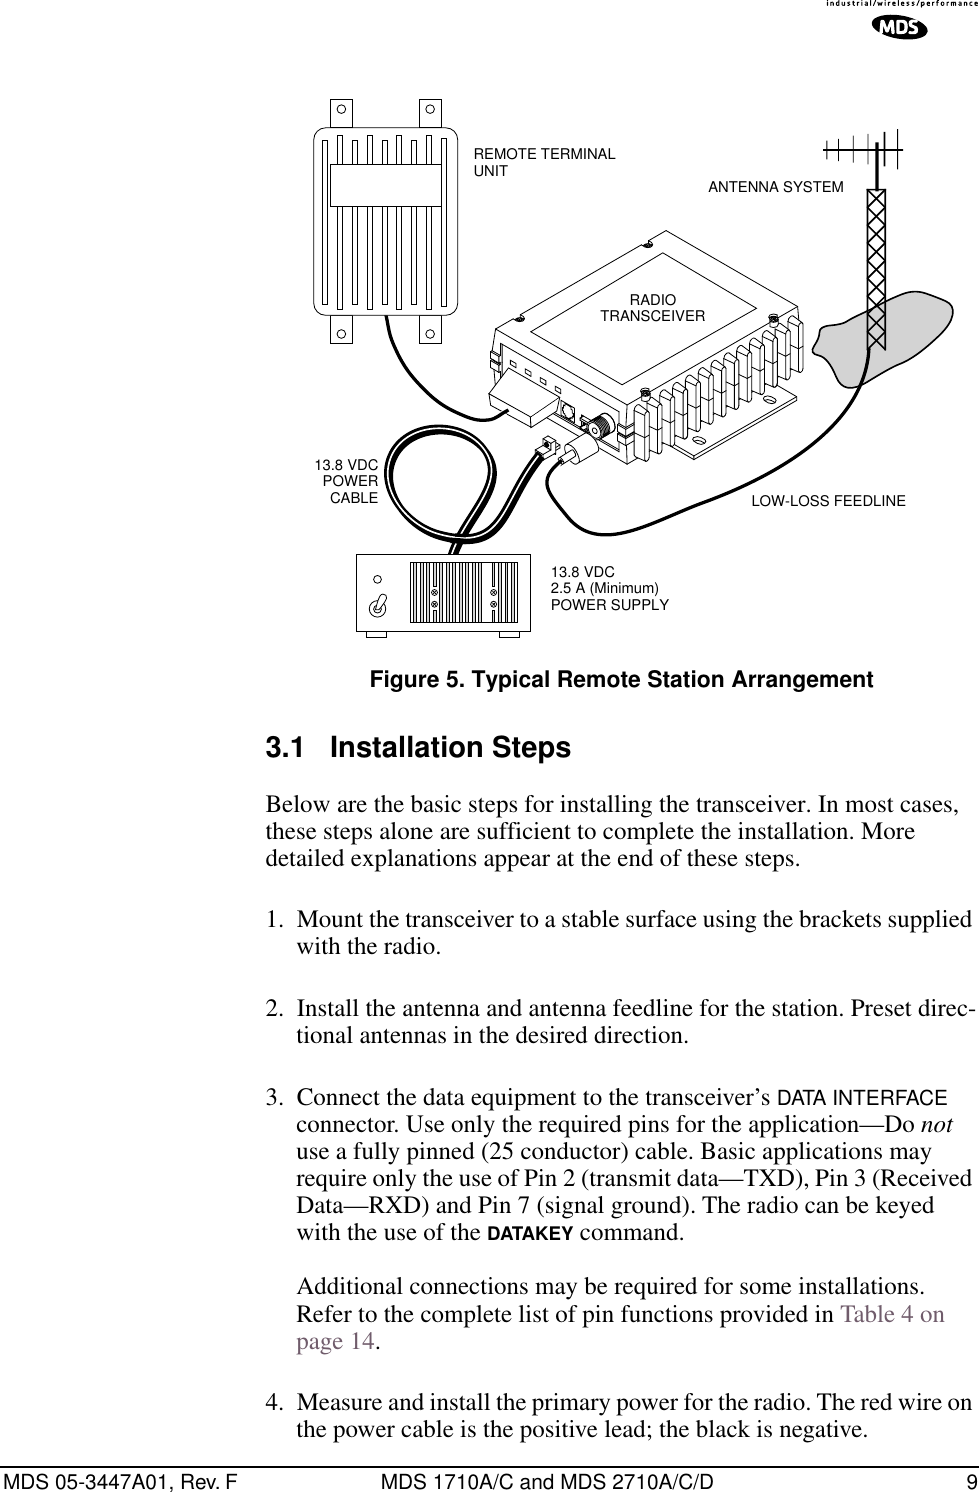 MDS 05-3447A01, Rev. F MDS 1710A/C and MDS 2710A/C/D 9Invisible place holderFigure 5. Typical Remote Station Arrangement3.1 Installation StepsBelow are the basic steps for installing the transceiver. In most cases, these steps alone are sufficient to complete the installation. More detailed explanations appear at the end of these steps.1. Mount the transceiver to a stable surface using the brackets supplied with the radio.2. Install the antenna and antenna feedline for the station. Preset direc-tional antennas in the desired direction.3. Connect the data equipment to the transceiver’s DATA INTERFACE connector. Use only the required pins for the application—Do not use a fully pinned (25 conductor) cable. Basic applications may require only the use of Pin 2 (transmit data—TXD), Pin 3 (Received Data—RXD) and Pin 7 (signal ground). The radio can be keyed with the use of the DATAKEY command.Additional connections may be required for some installations. Refer to the complete list of pin functions provided in Table 4 on page 14.4. Measure and install the primary power for the radio. The red wire on the power cable is the positive lead; the black is negative.13.8 VDCPOWER CABLE13.8 VDC2.5 A (Minimum)POWER SUPPLYREMOTE TERMINAL UNIT ANTENNA SYSTEMLOW-LOSS FEEDLINERADIO TRANSCEIVER